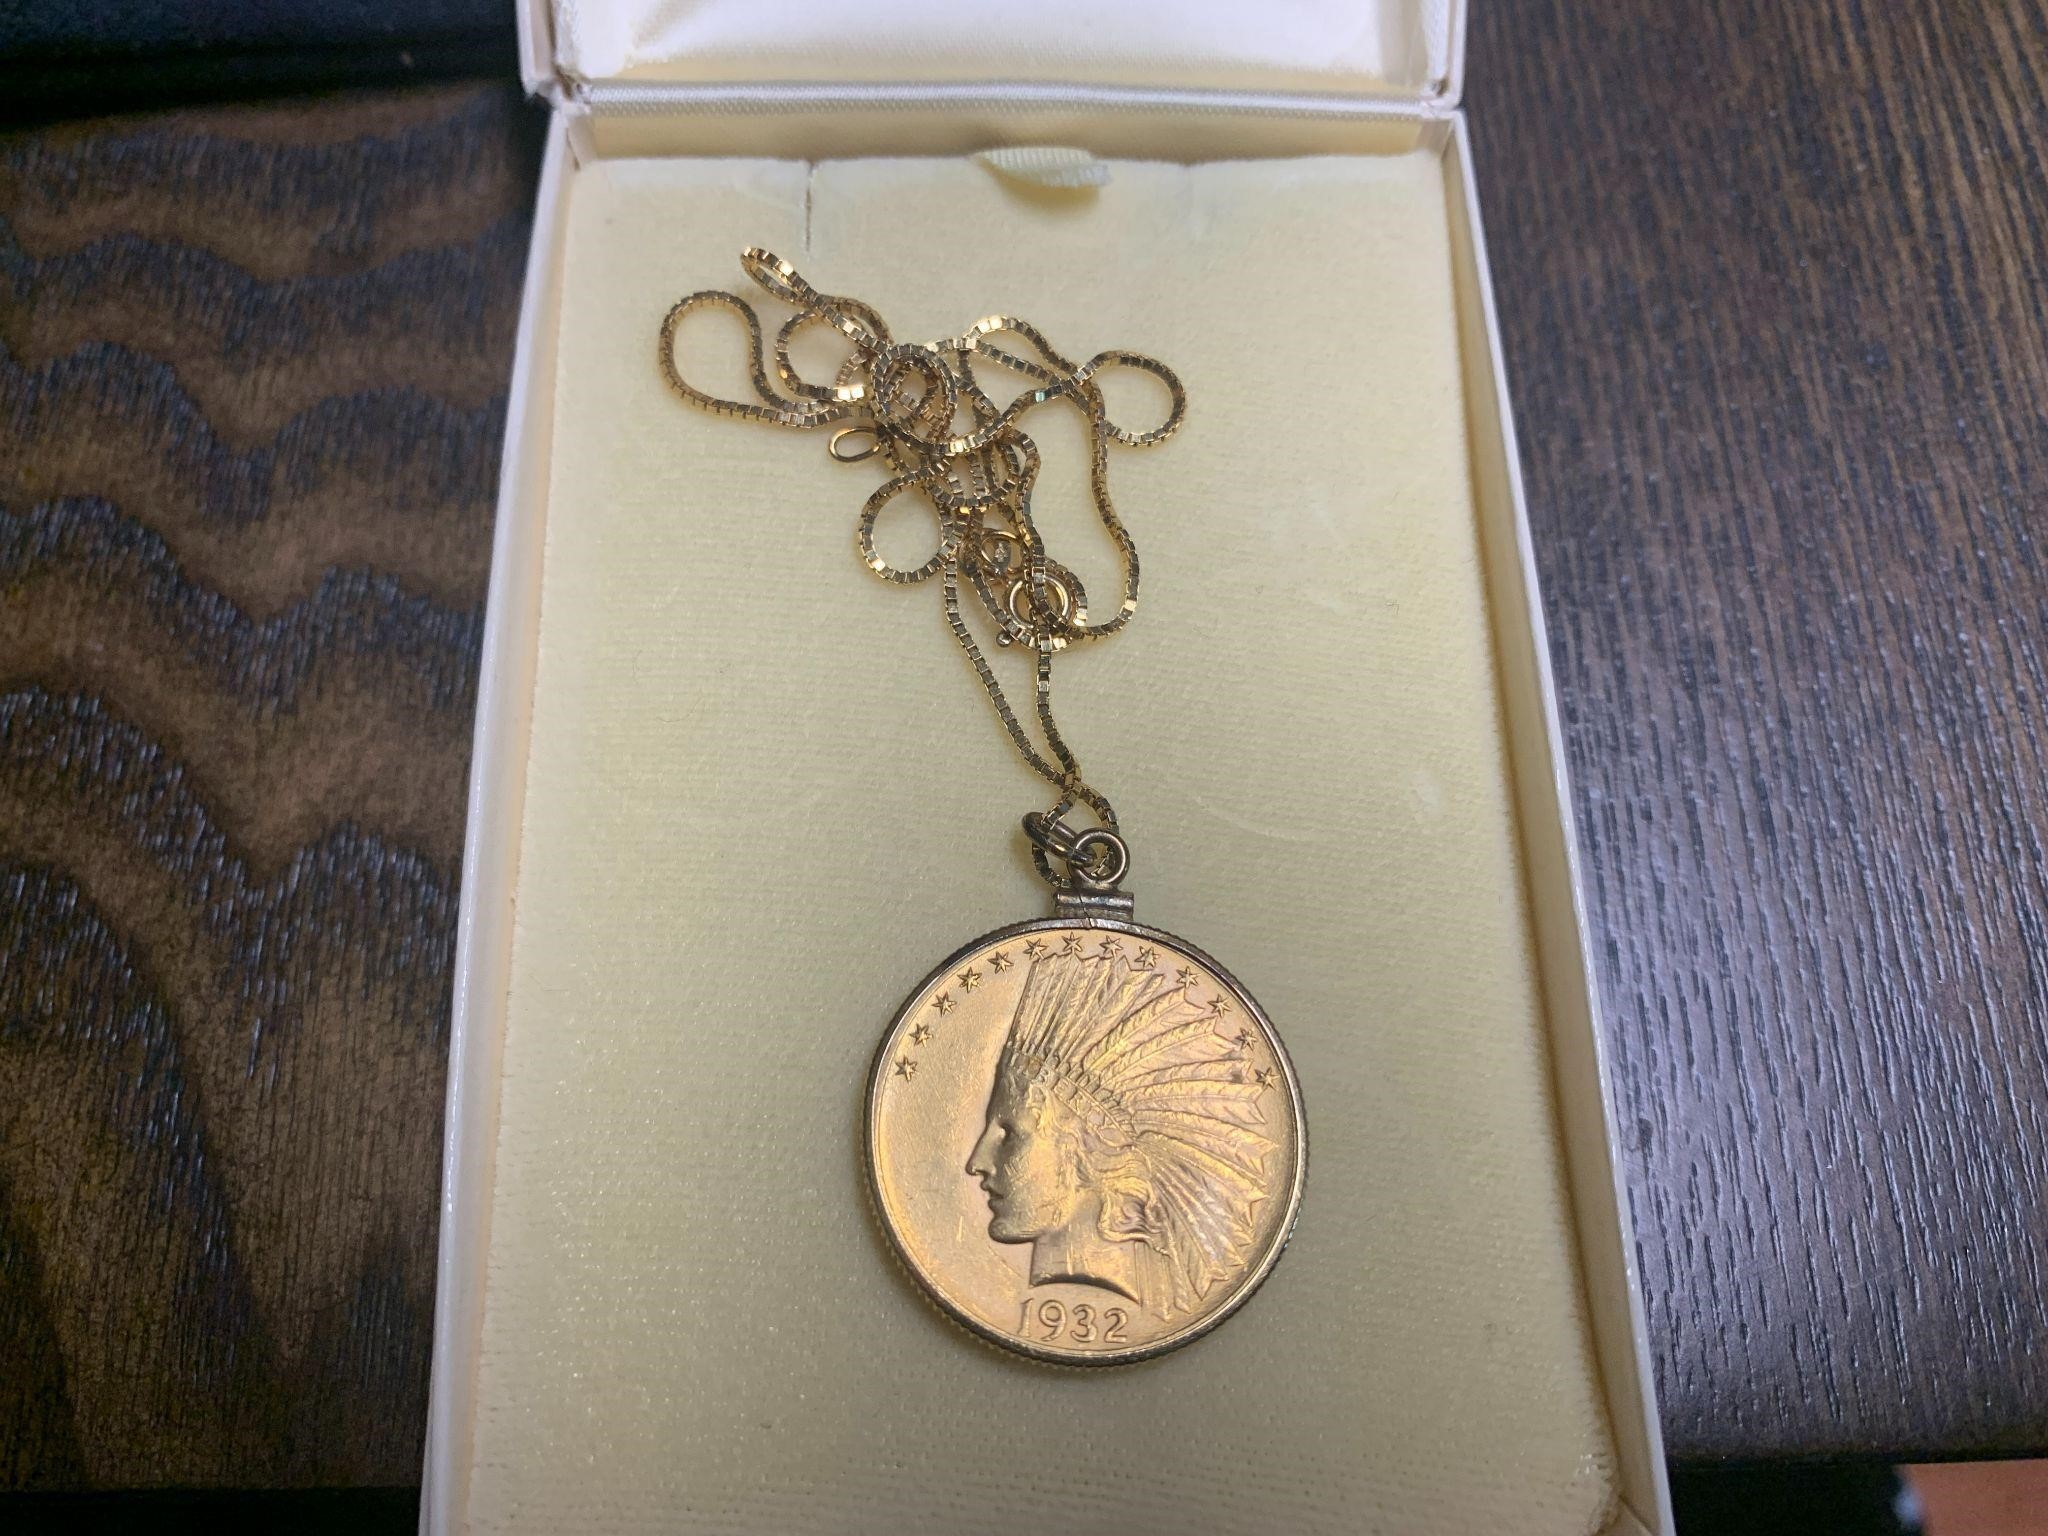 1932 $10 Gold Coin/ Necklace